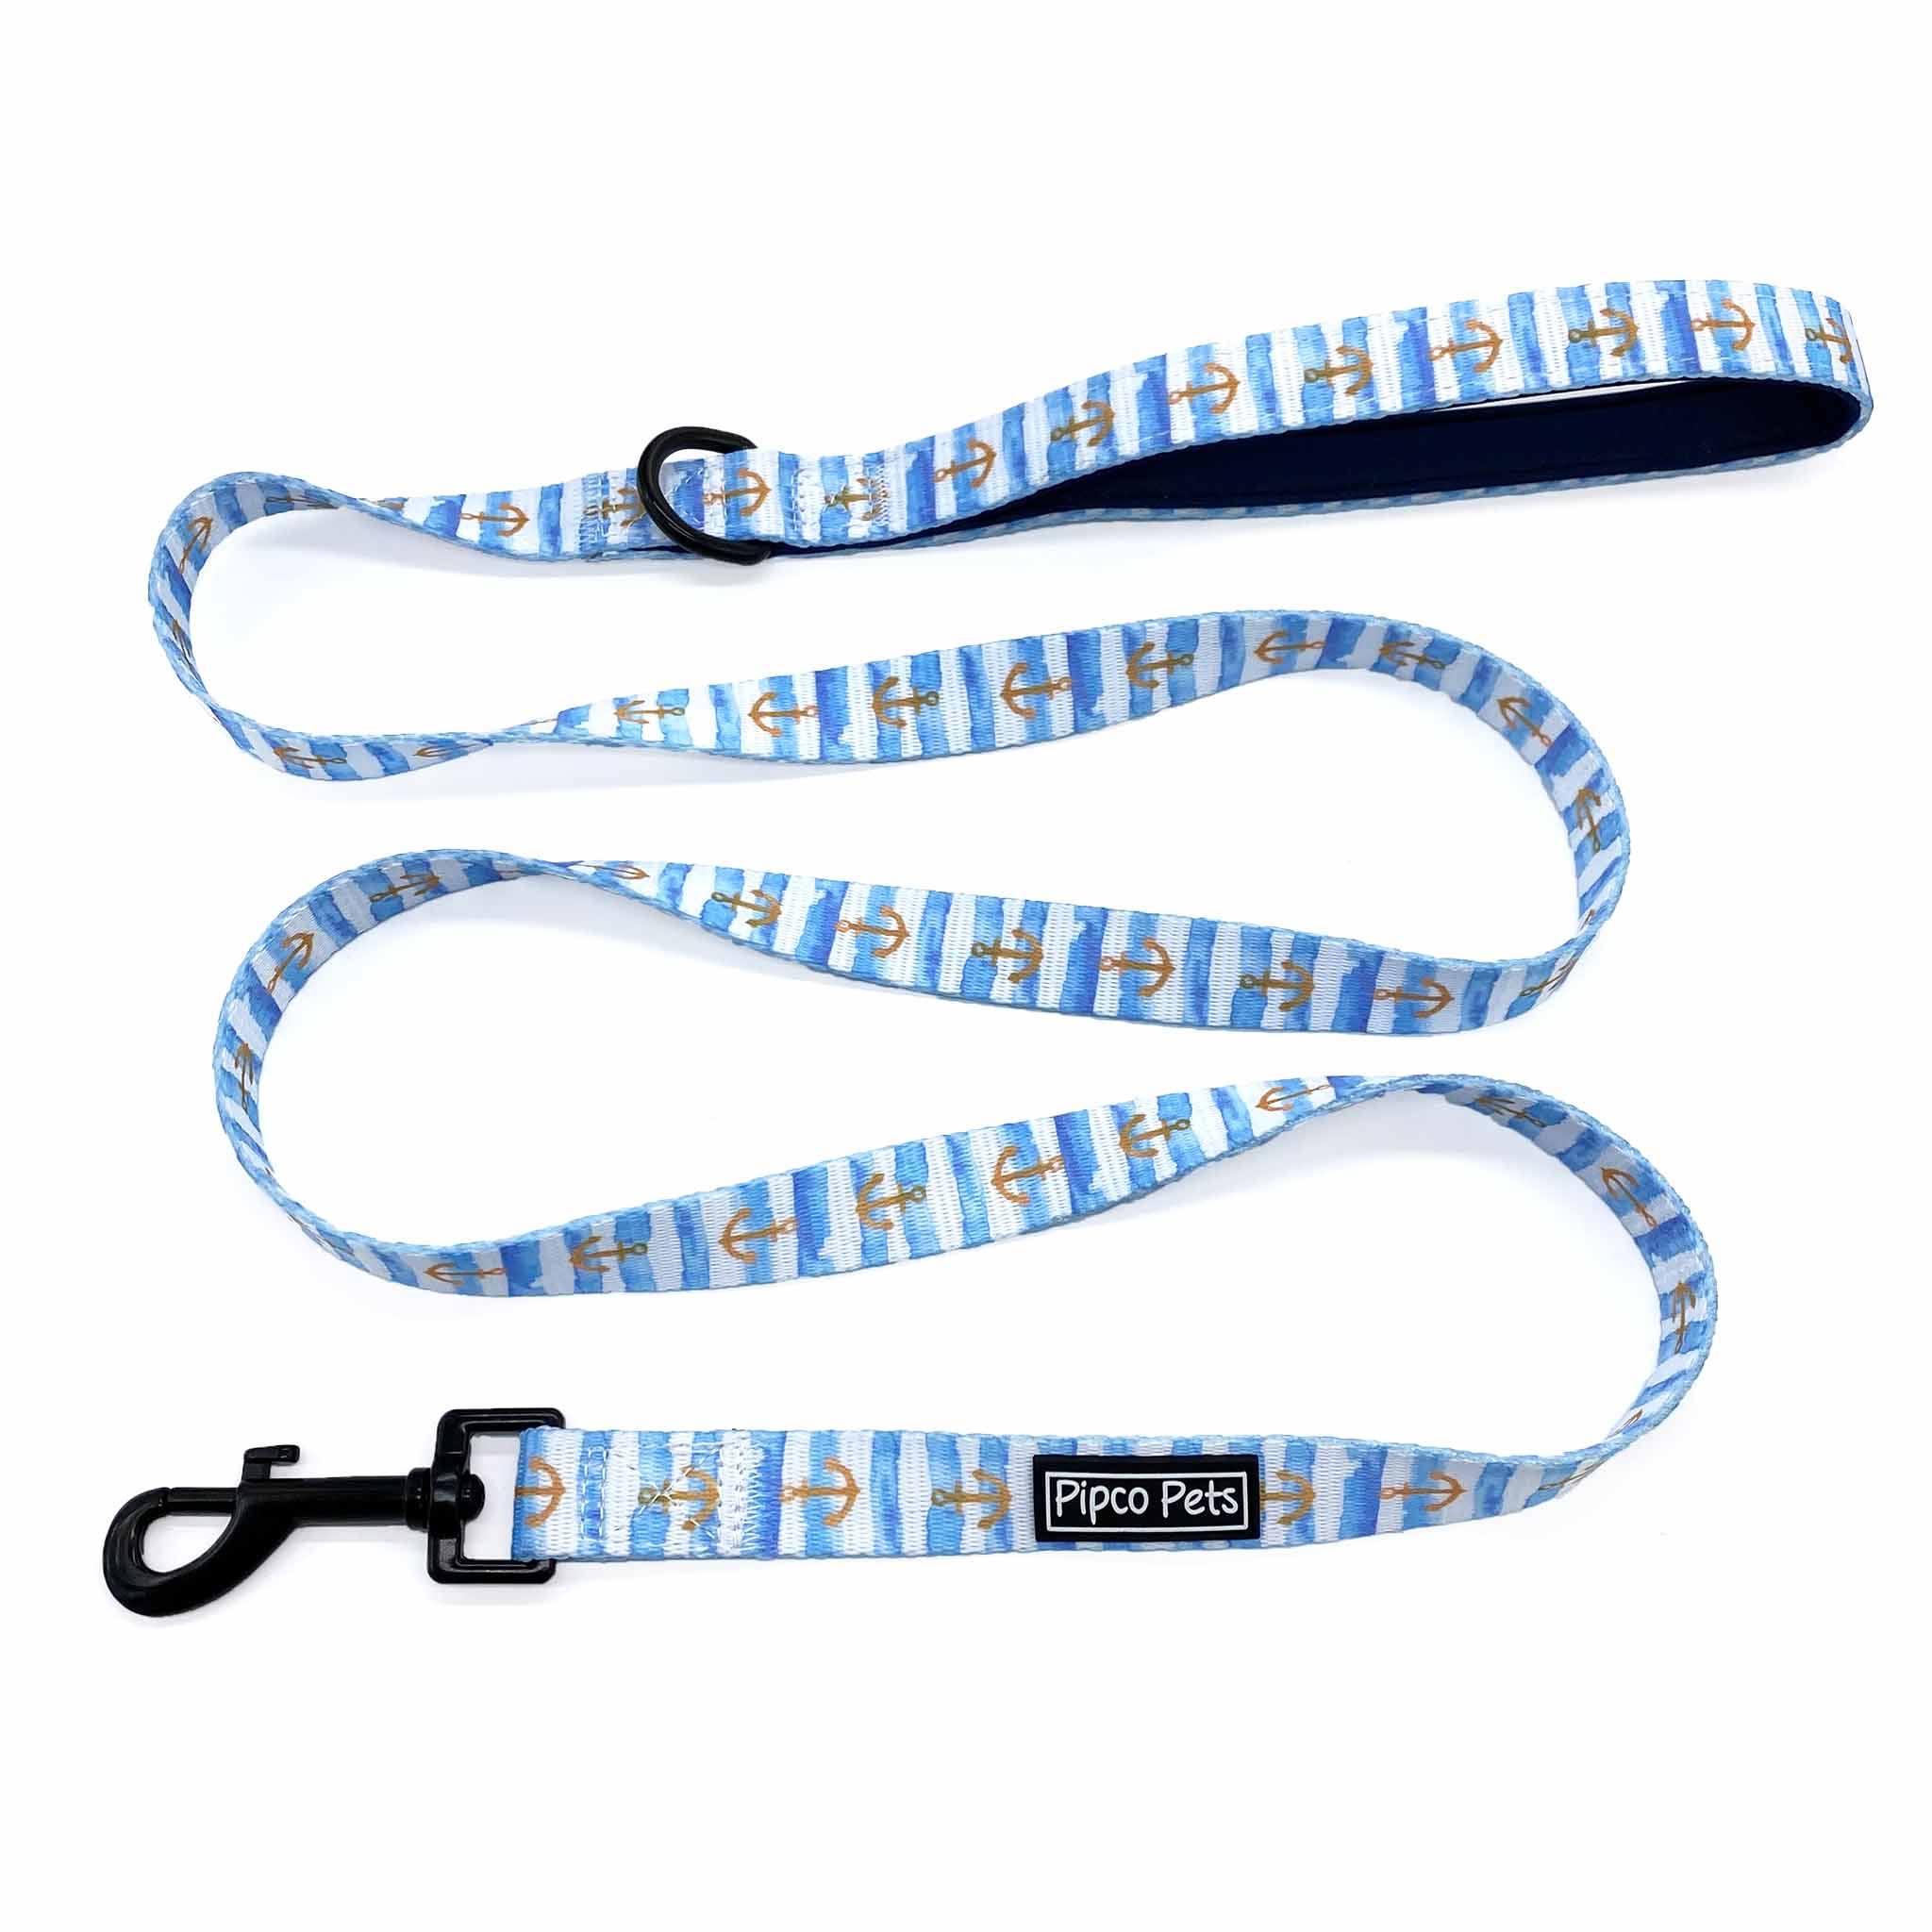 Pipco Pets dog leash with Sailor Pup anchors print pattern in blue